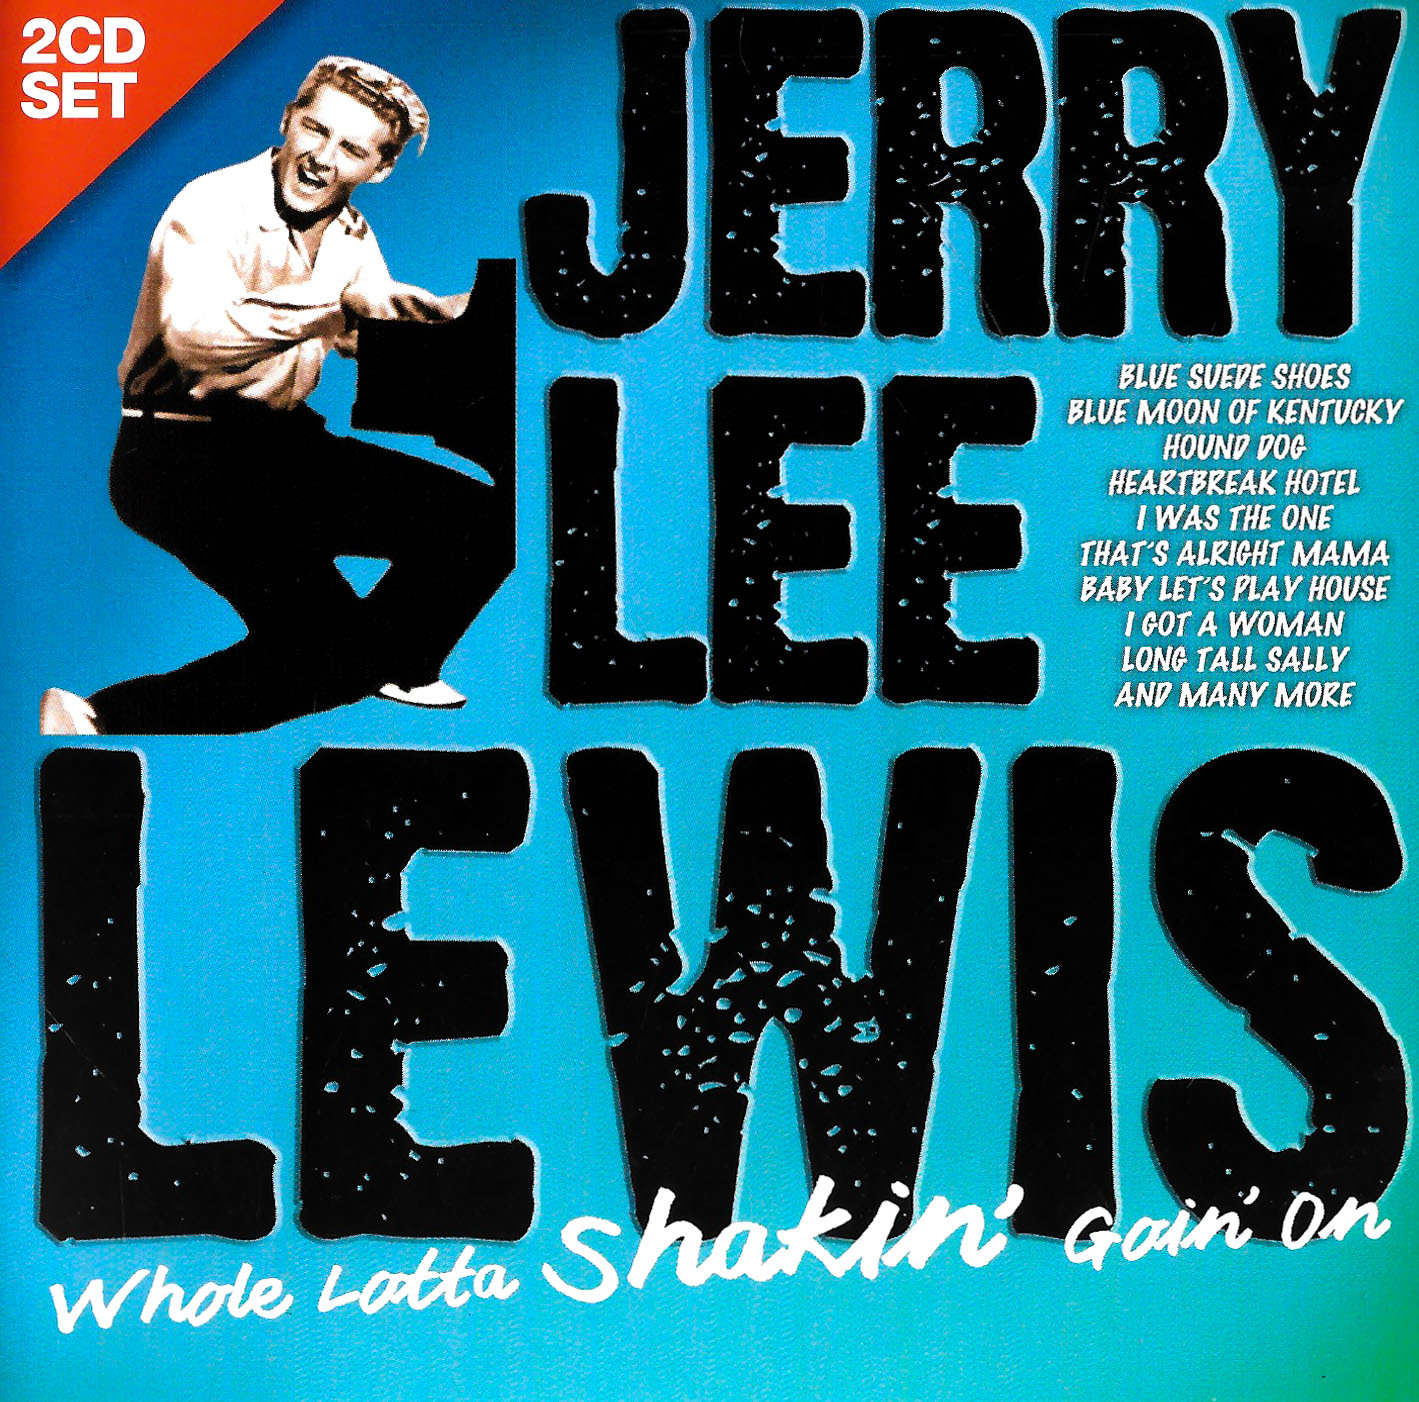 Whole Lotta Shakin Goin On Jerry Lee Lewis 2 Disc Set Music Cd New Sealed Ebay 8408